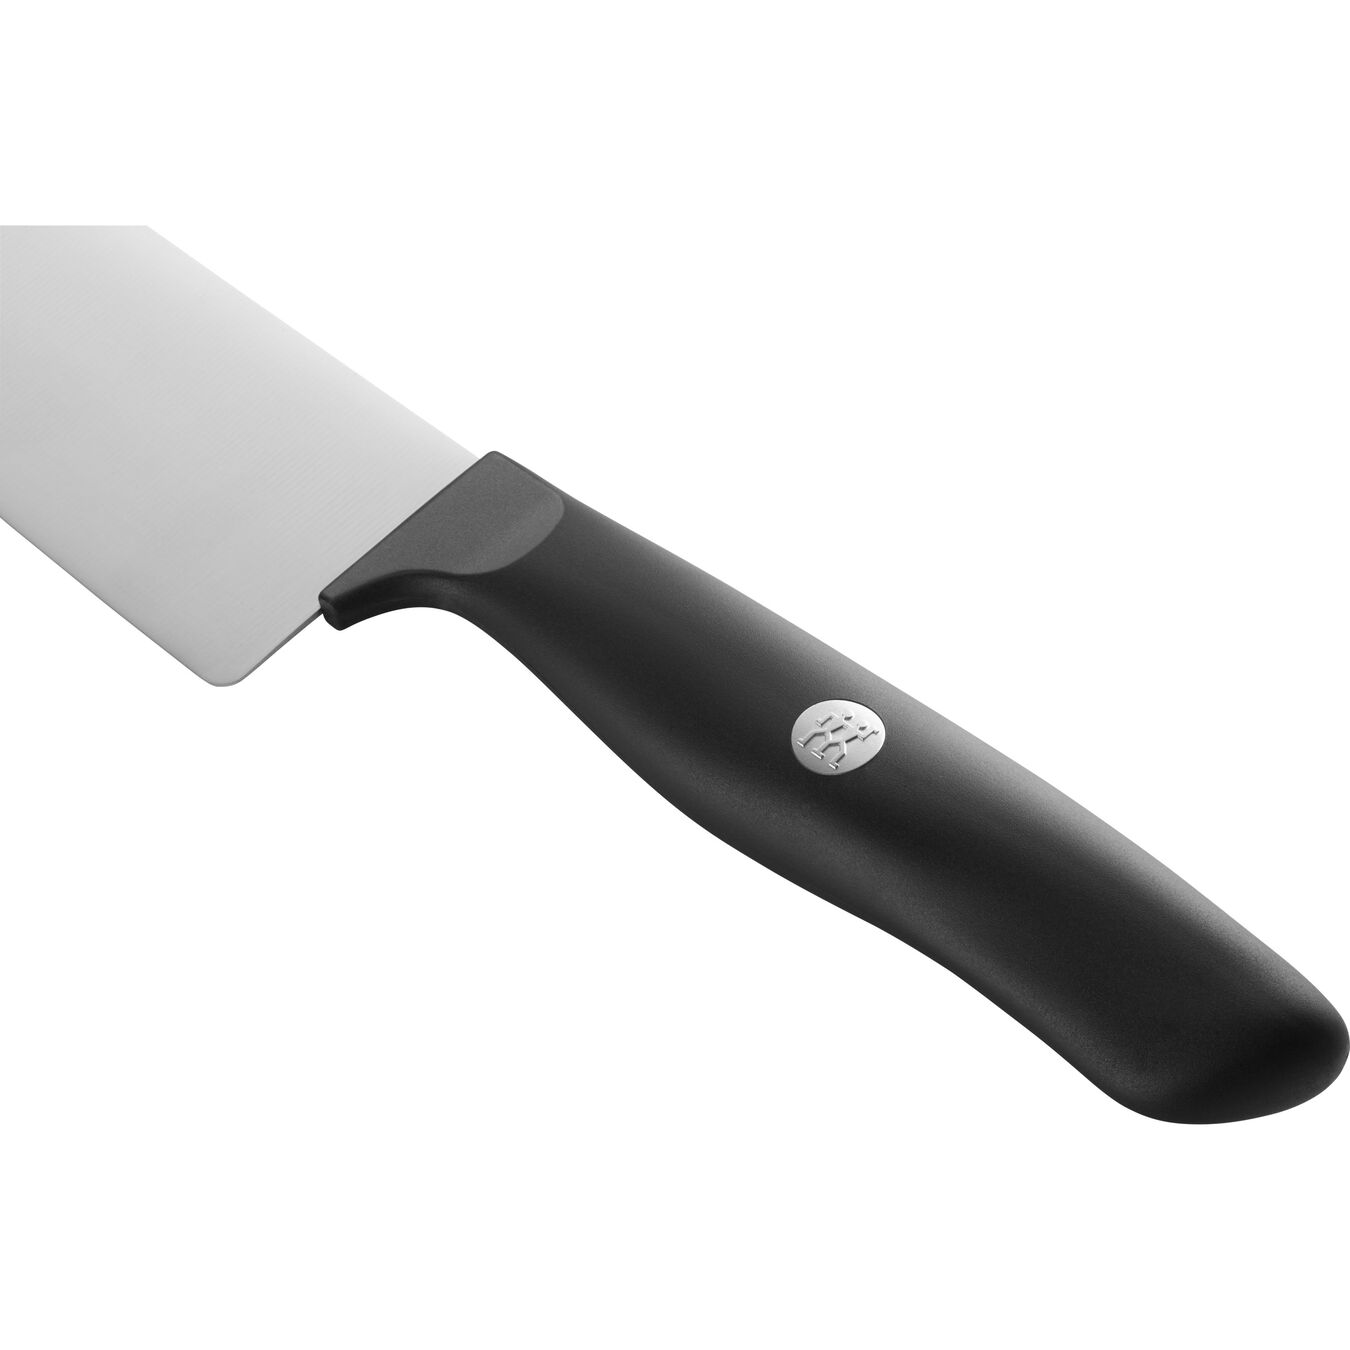 8-inch, Chef's knife - Visual Imperfections,,large 2